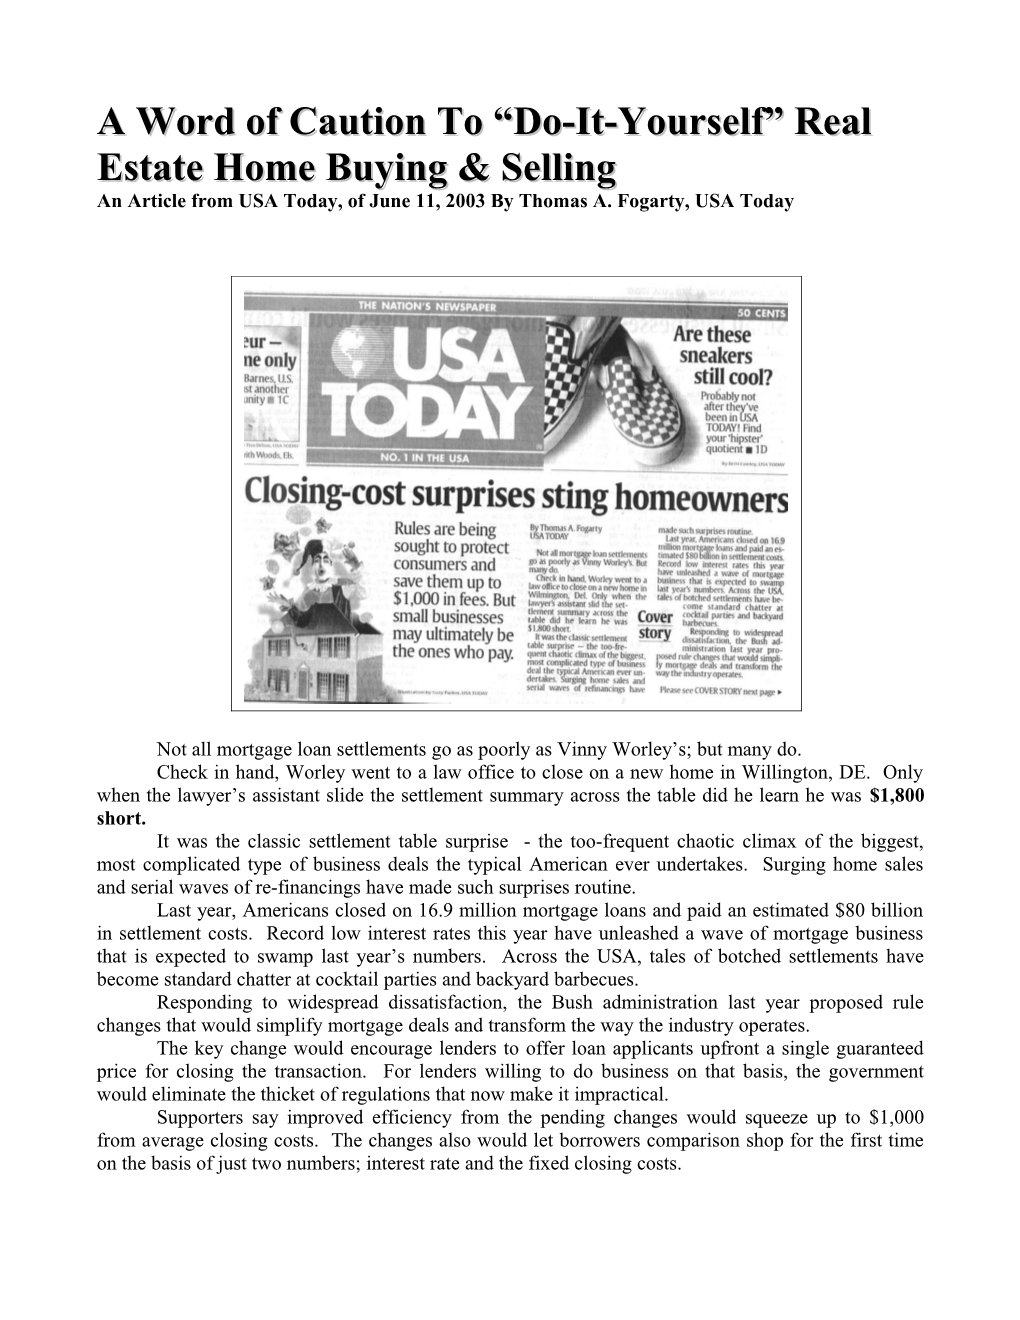 A Word of Caution to Do-It-Yourself Real Estate Home Buying & Selling